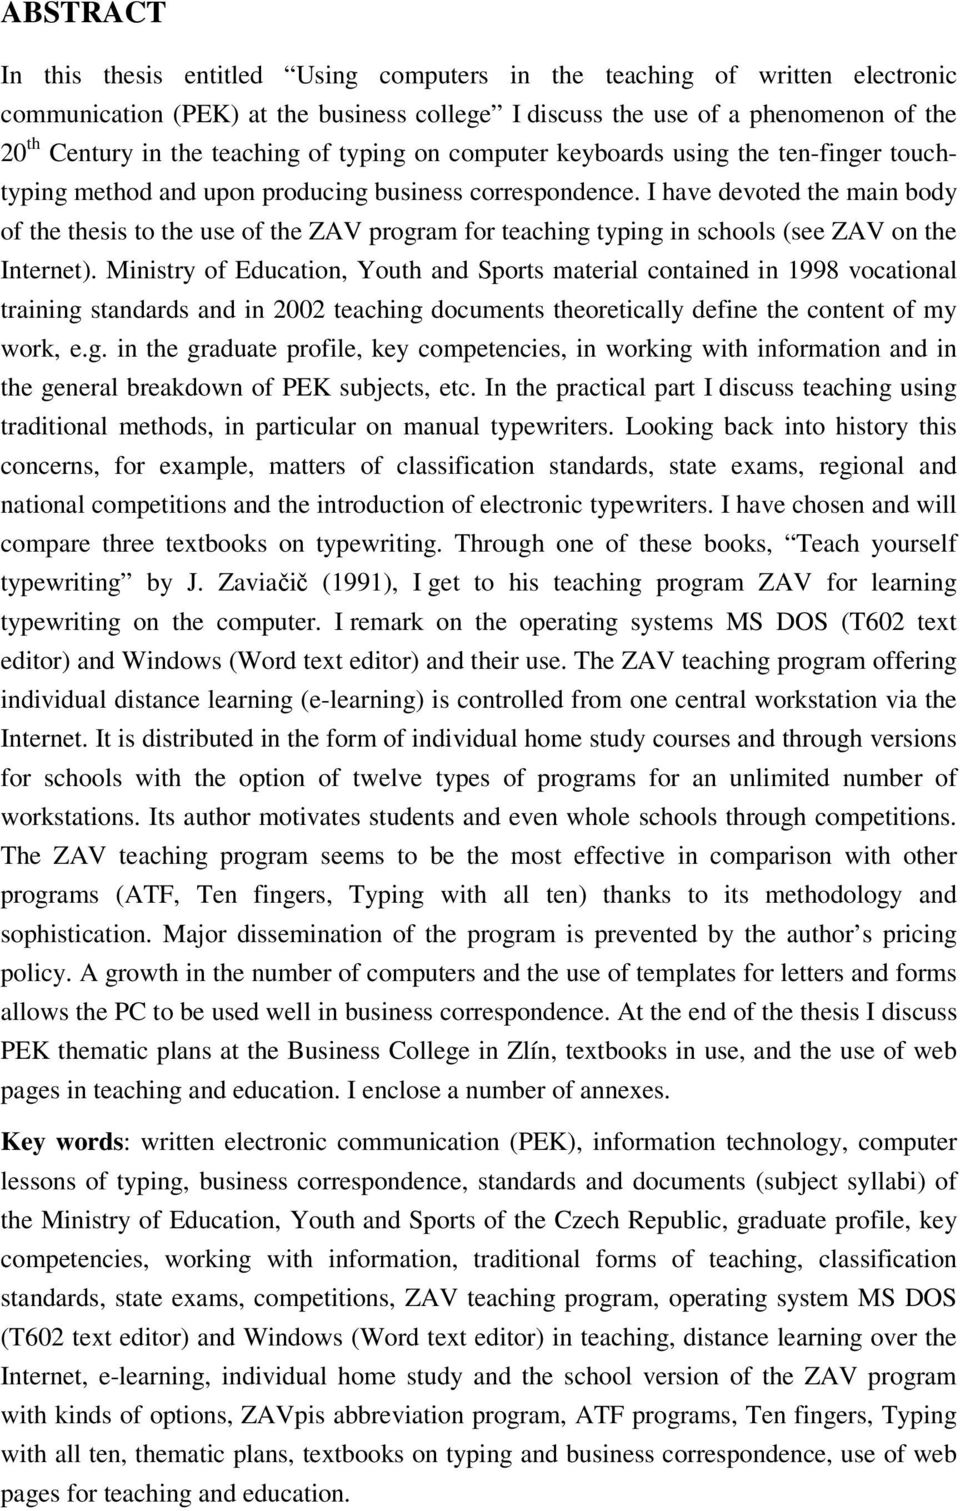 I have devoted the main body of the thesis to the use of the ZAV program for teaching typing in schools (see ZAV on the Internet).